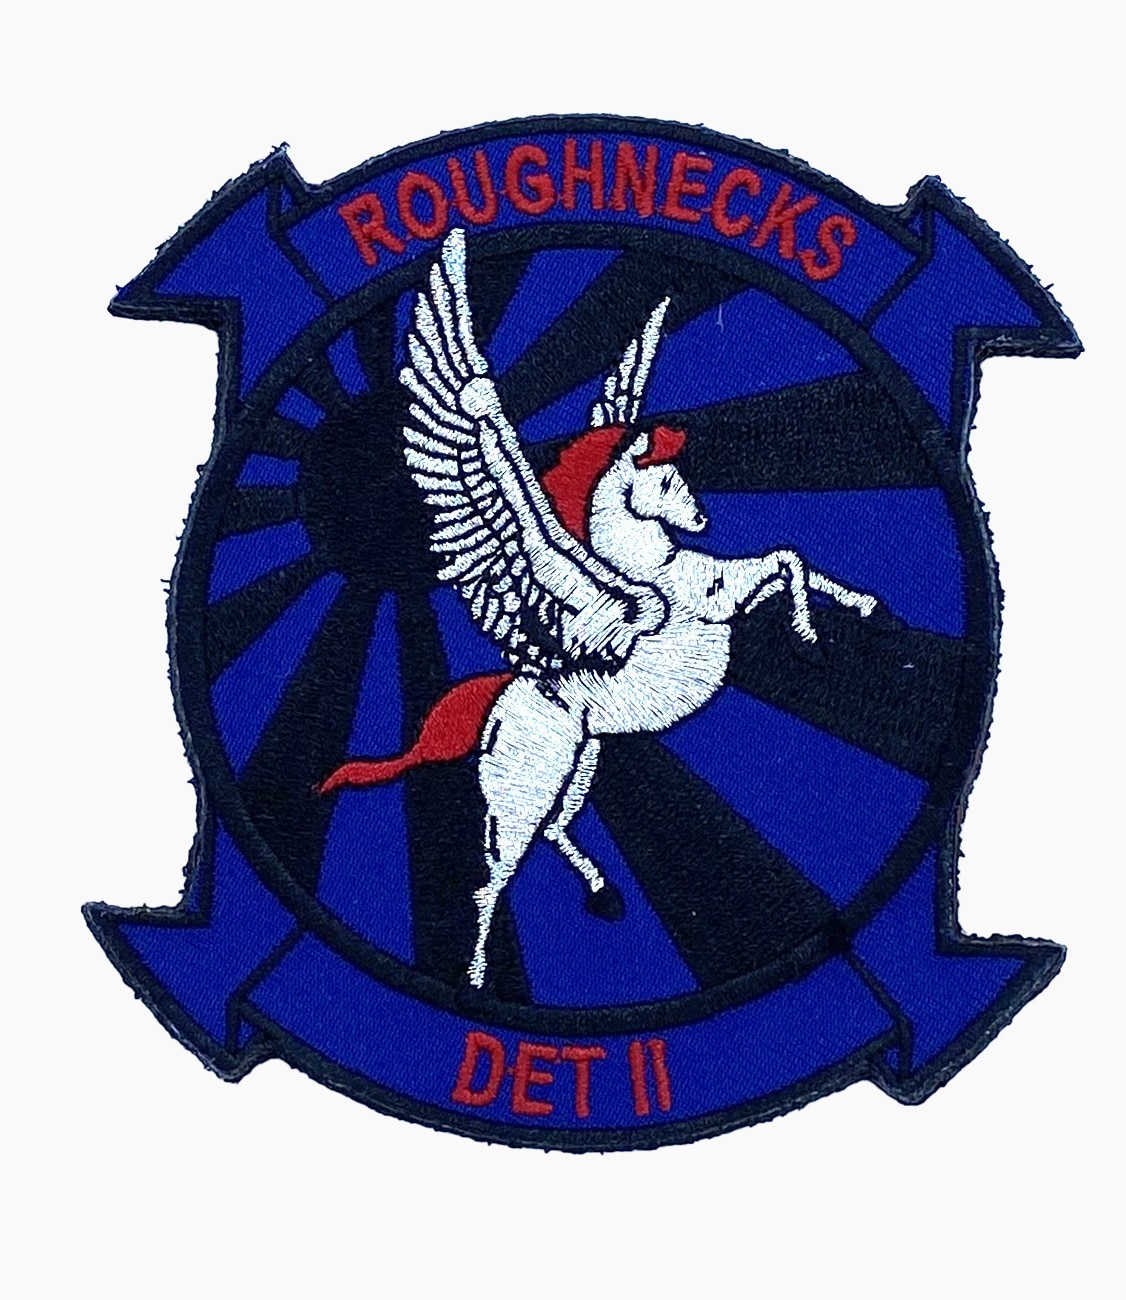 VRC-30 DET II Roughnecks Patch –With Hook and Loop, 4"